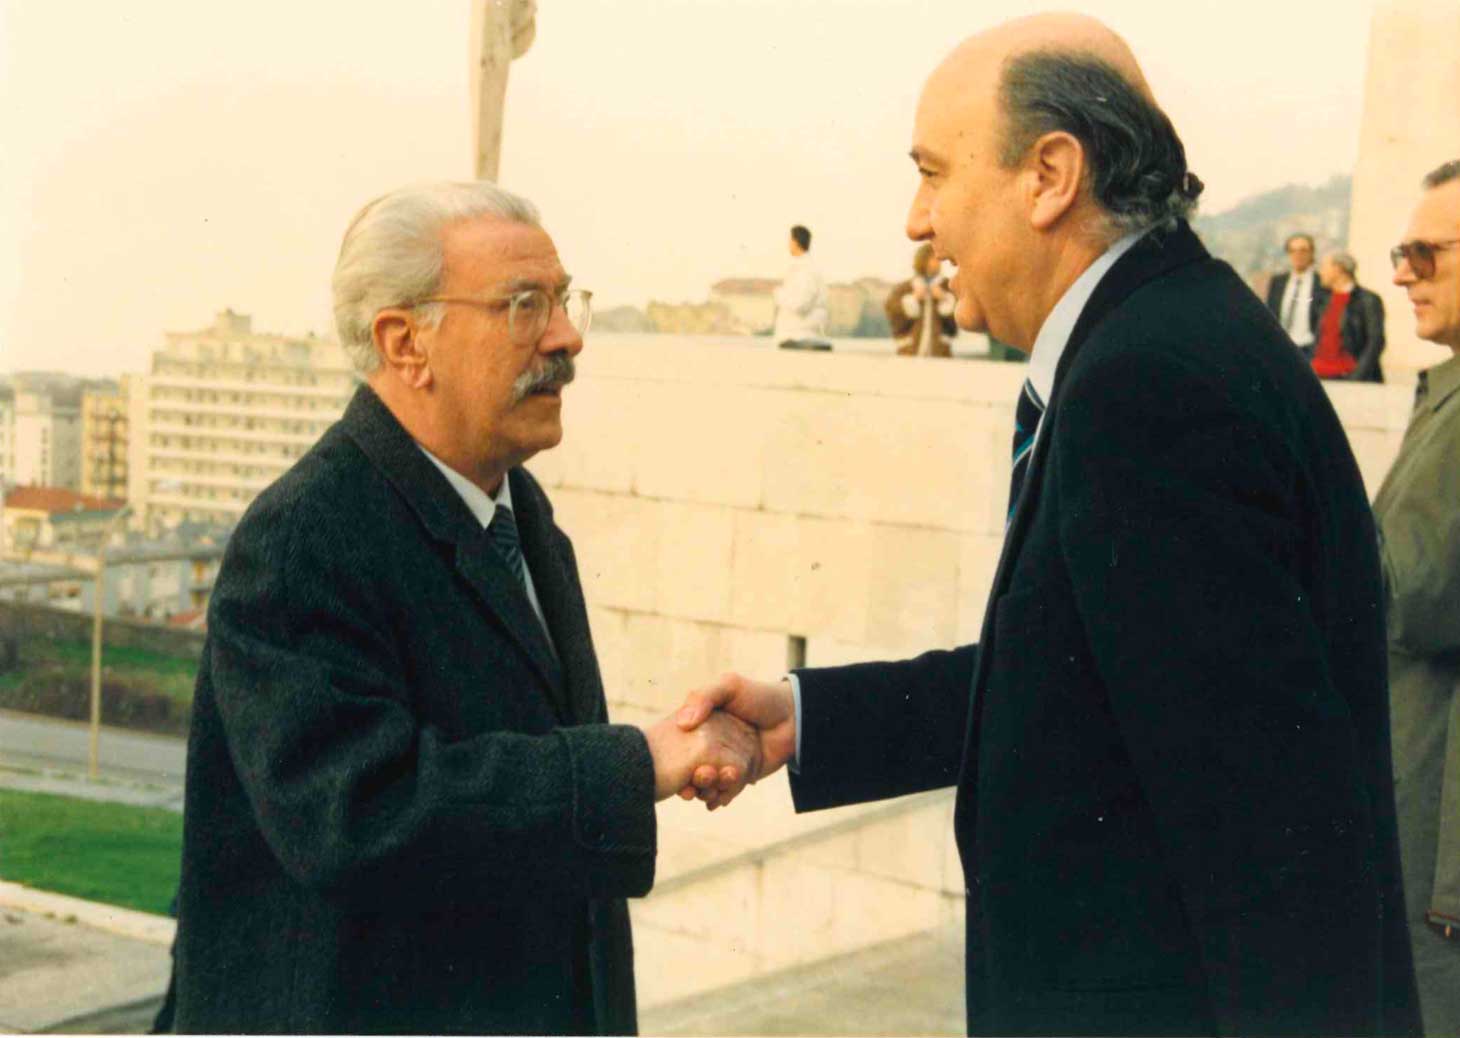 two men shaking hands while standing next to each other